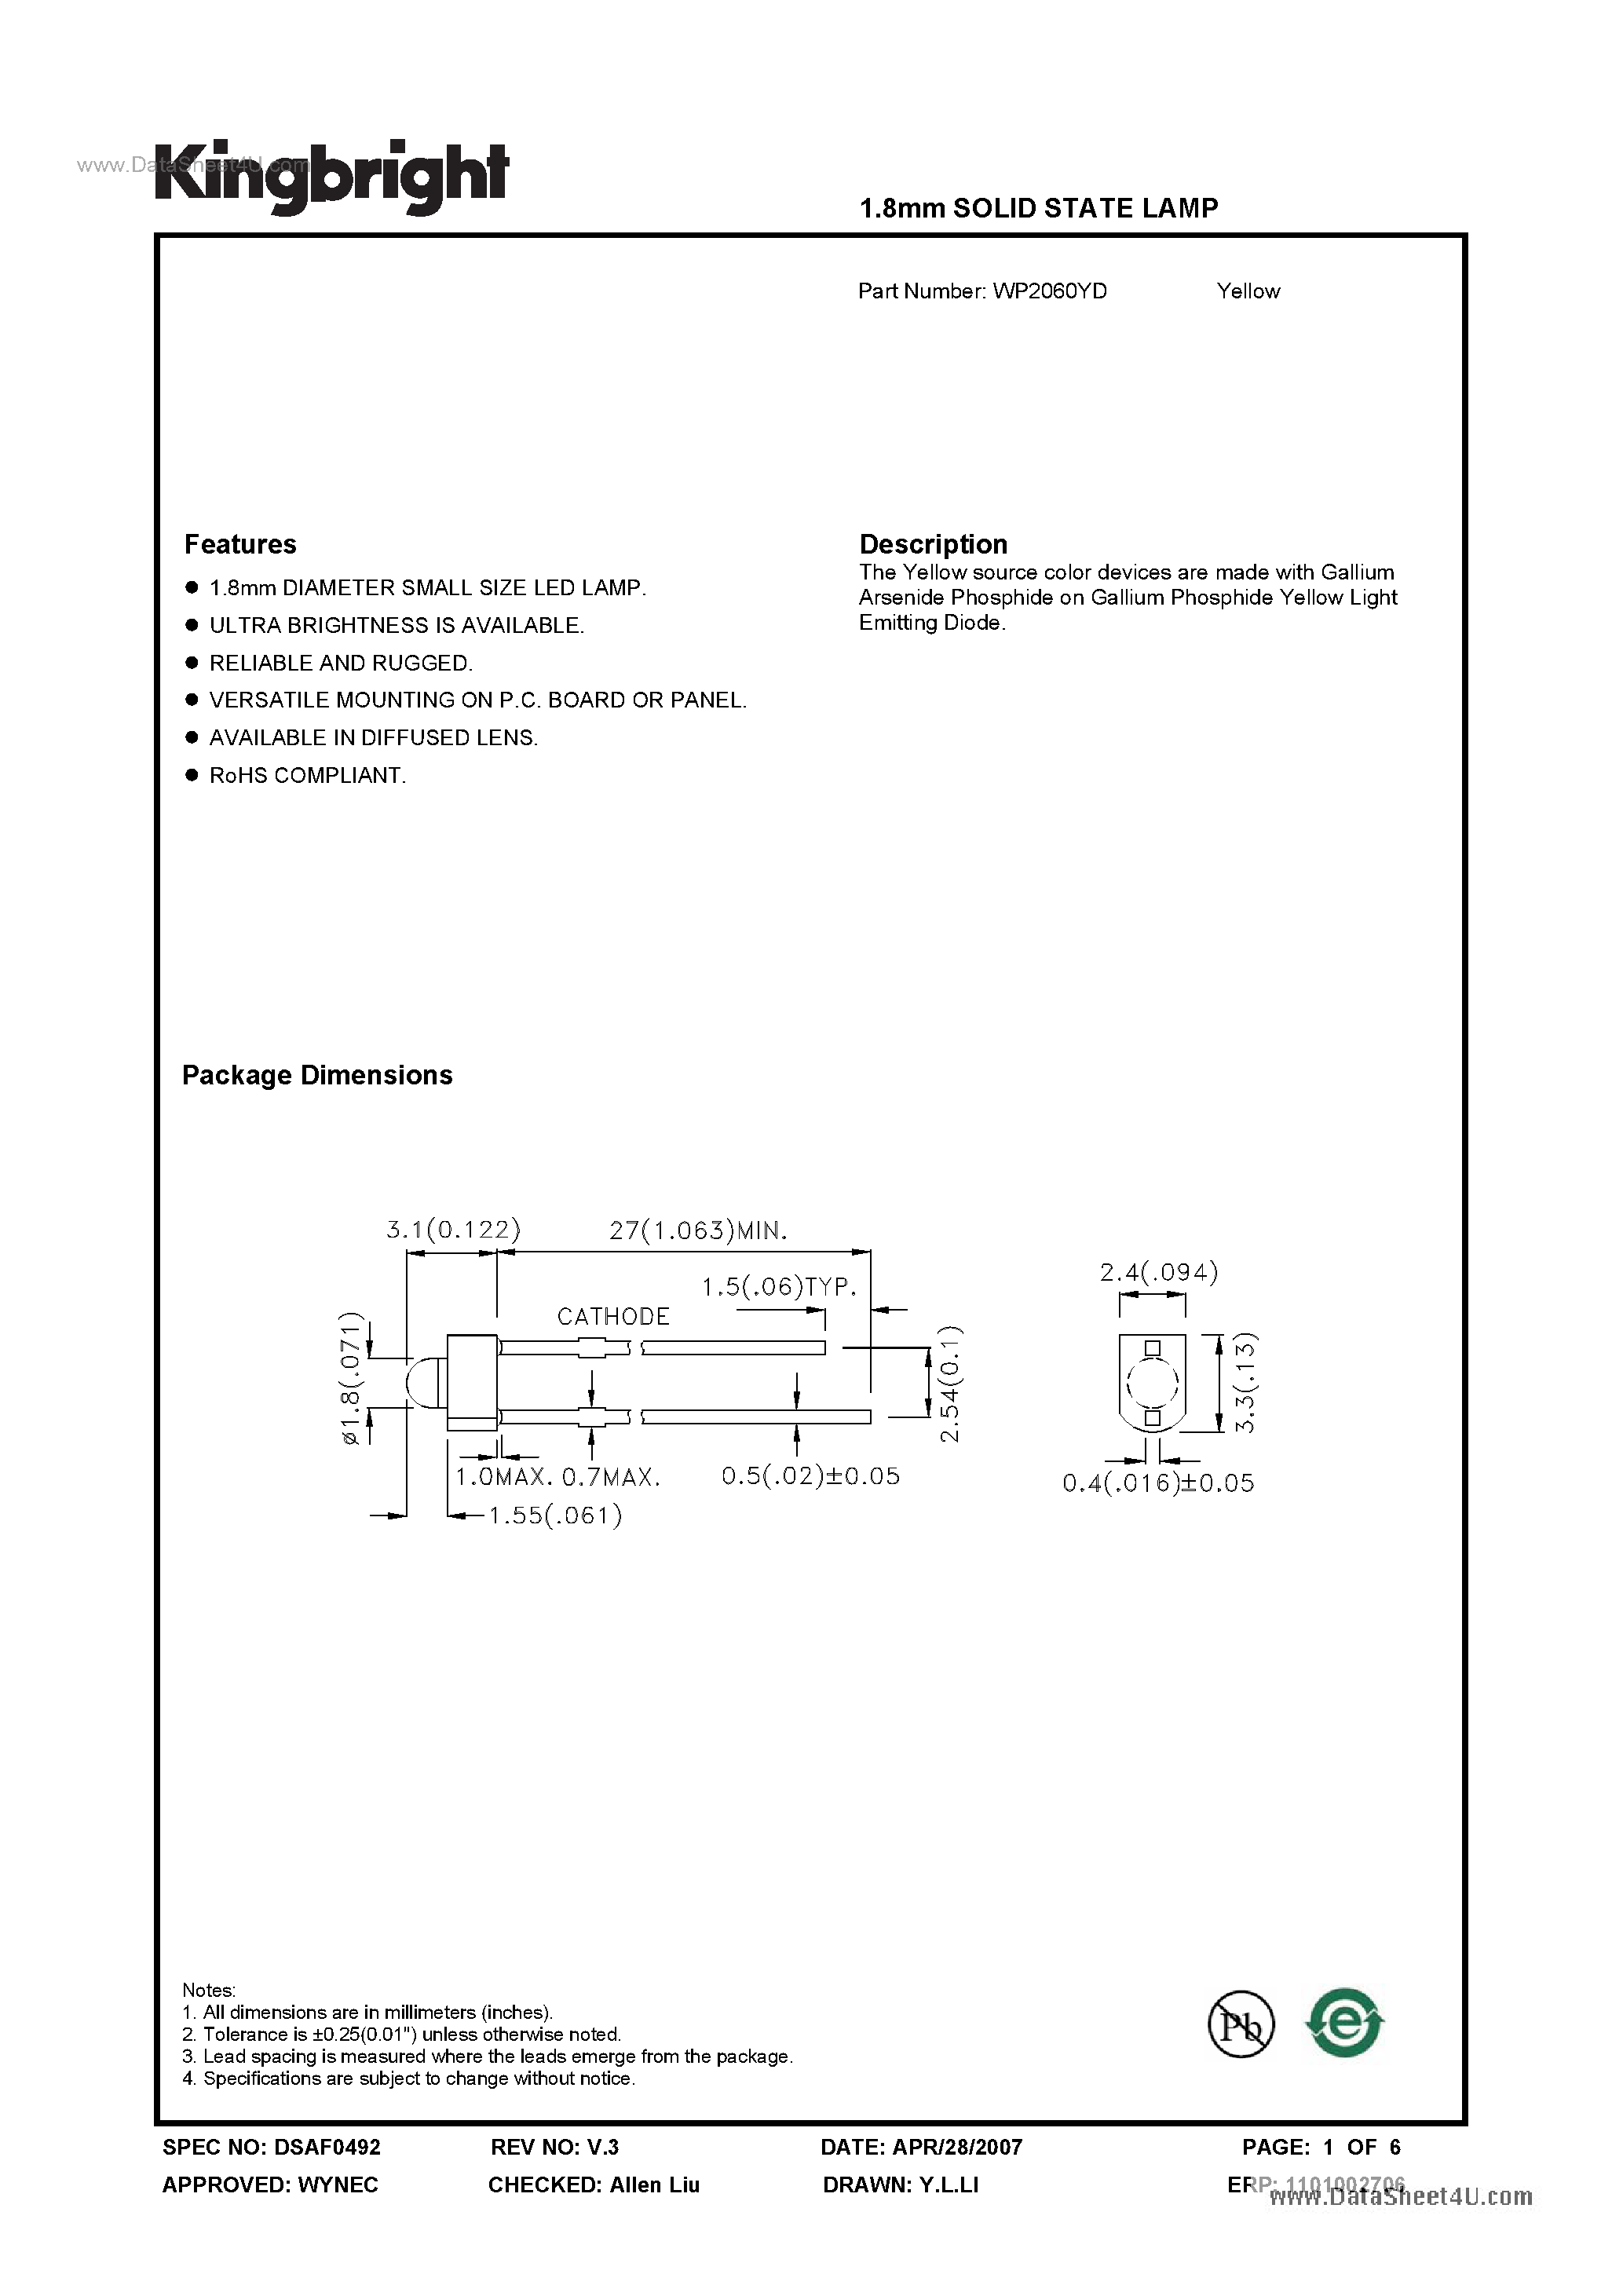 Datasheet WP2060YD - SOLID STATE LAMP page 1